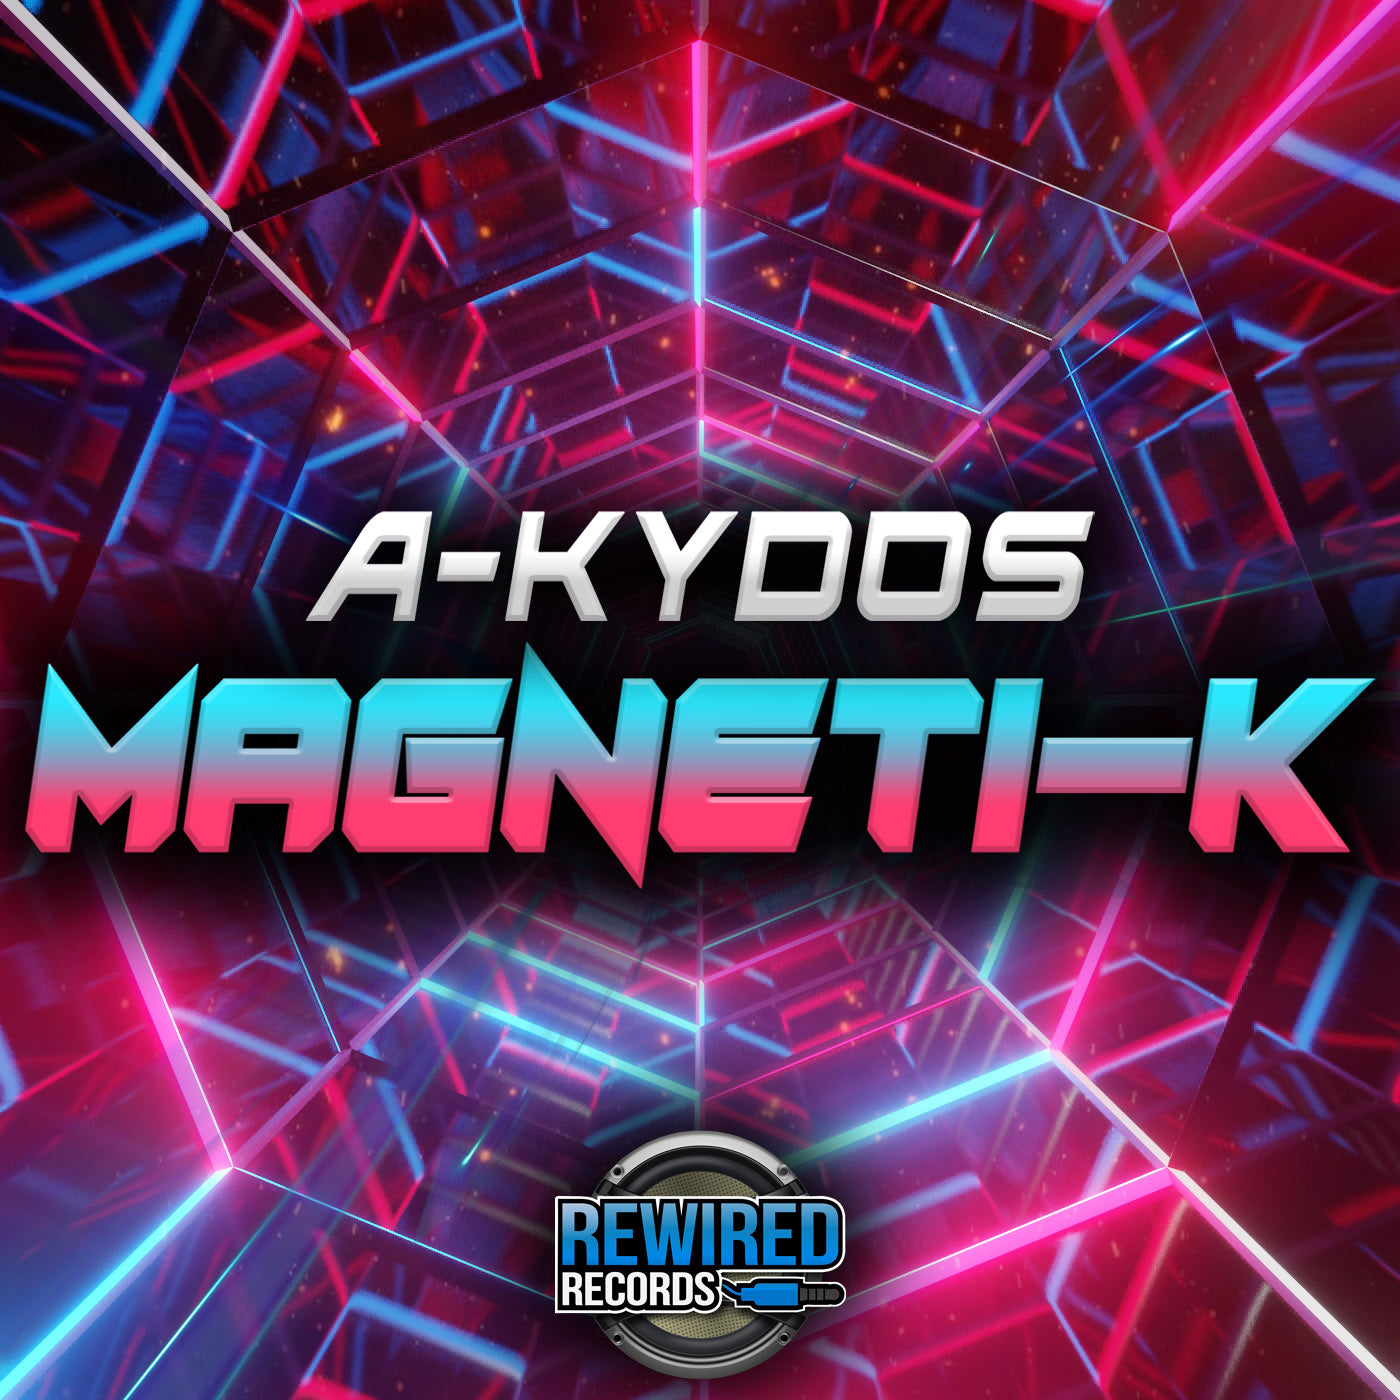 A-kydos - Magneti-k - Rewired Records